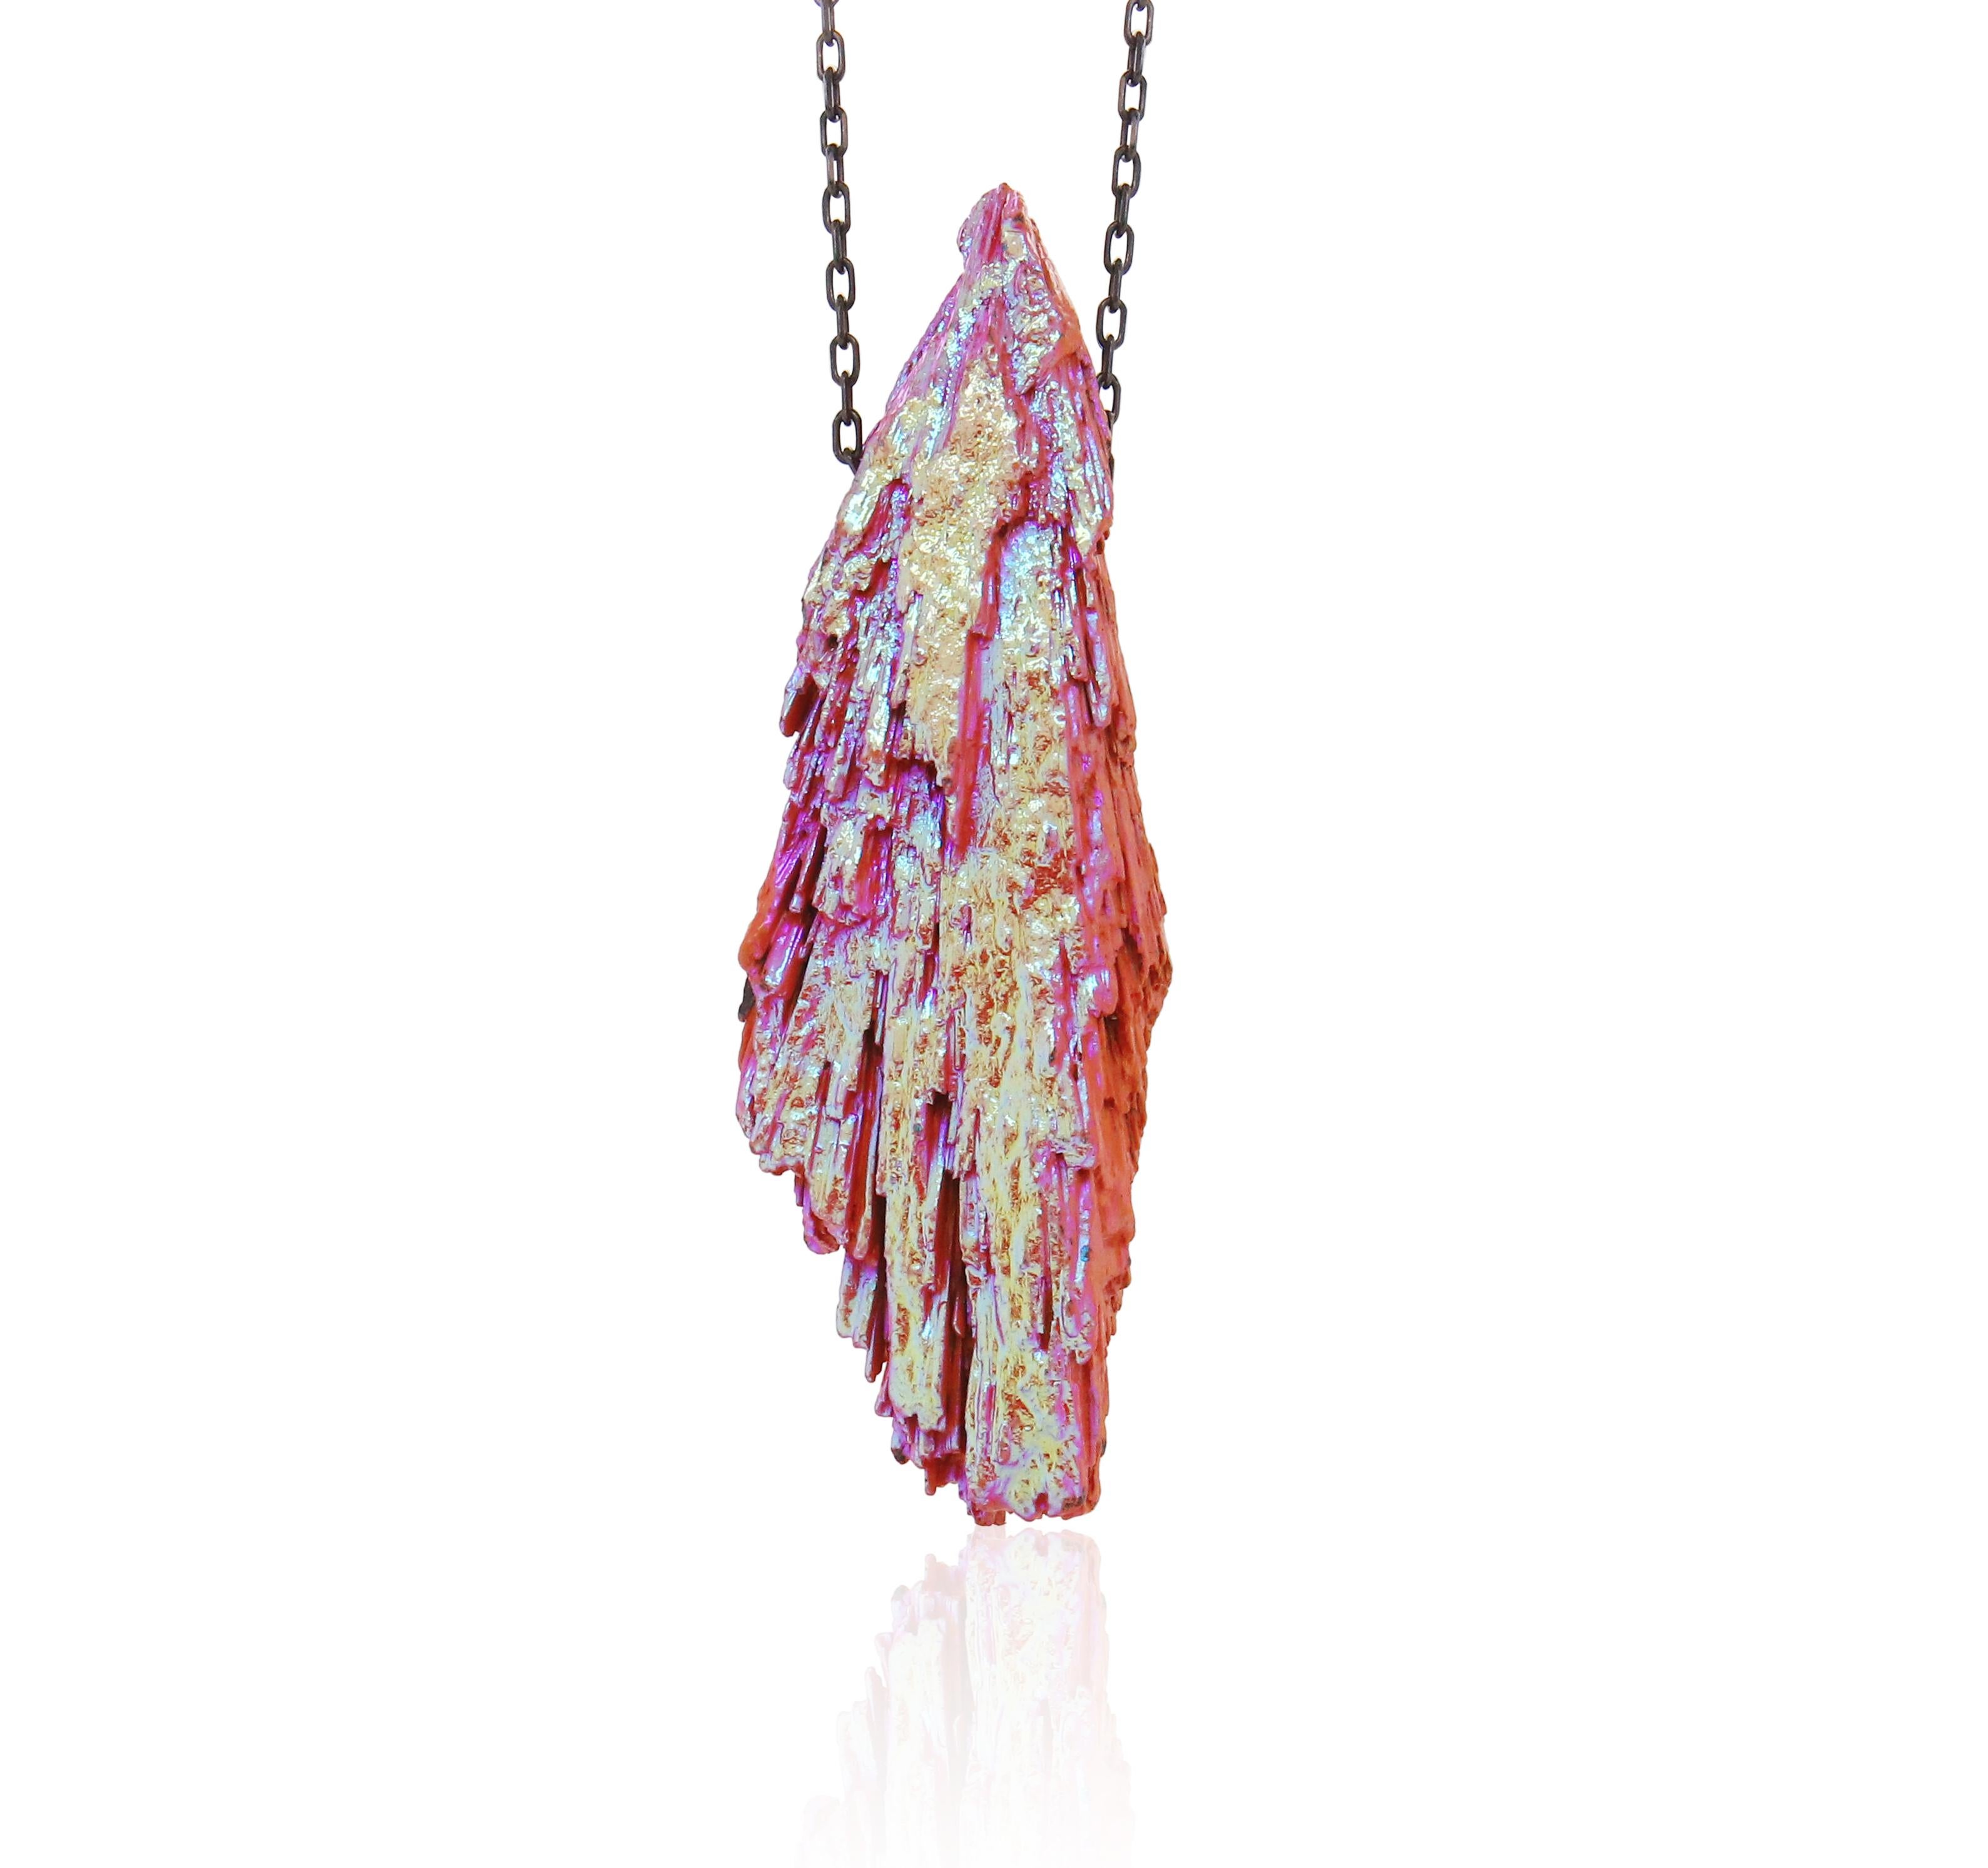 A unique, large pink and gold Kyanite on a black silver chain!

Fine one-of-a-kind craftsmanship meets incredible quality in this breathtaking piece of jewelry.

Undeniably rare, colorfully bright, and promised to last a lifetime, gemstones are